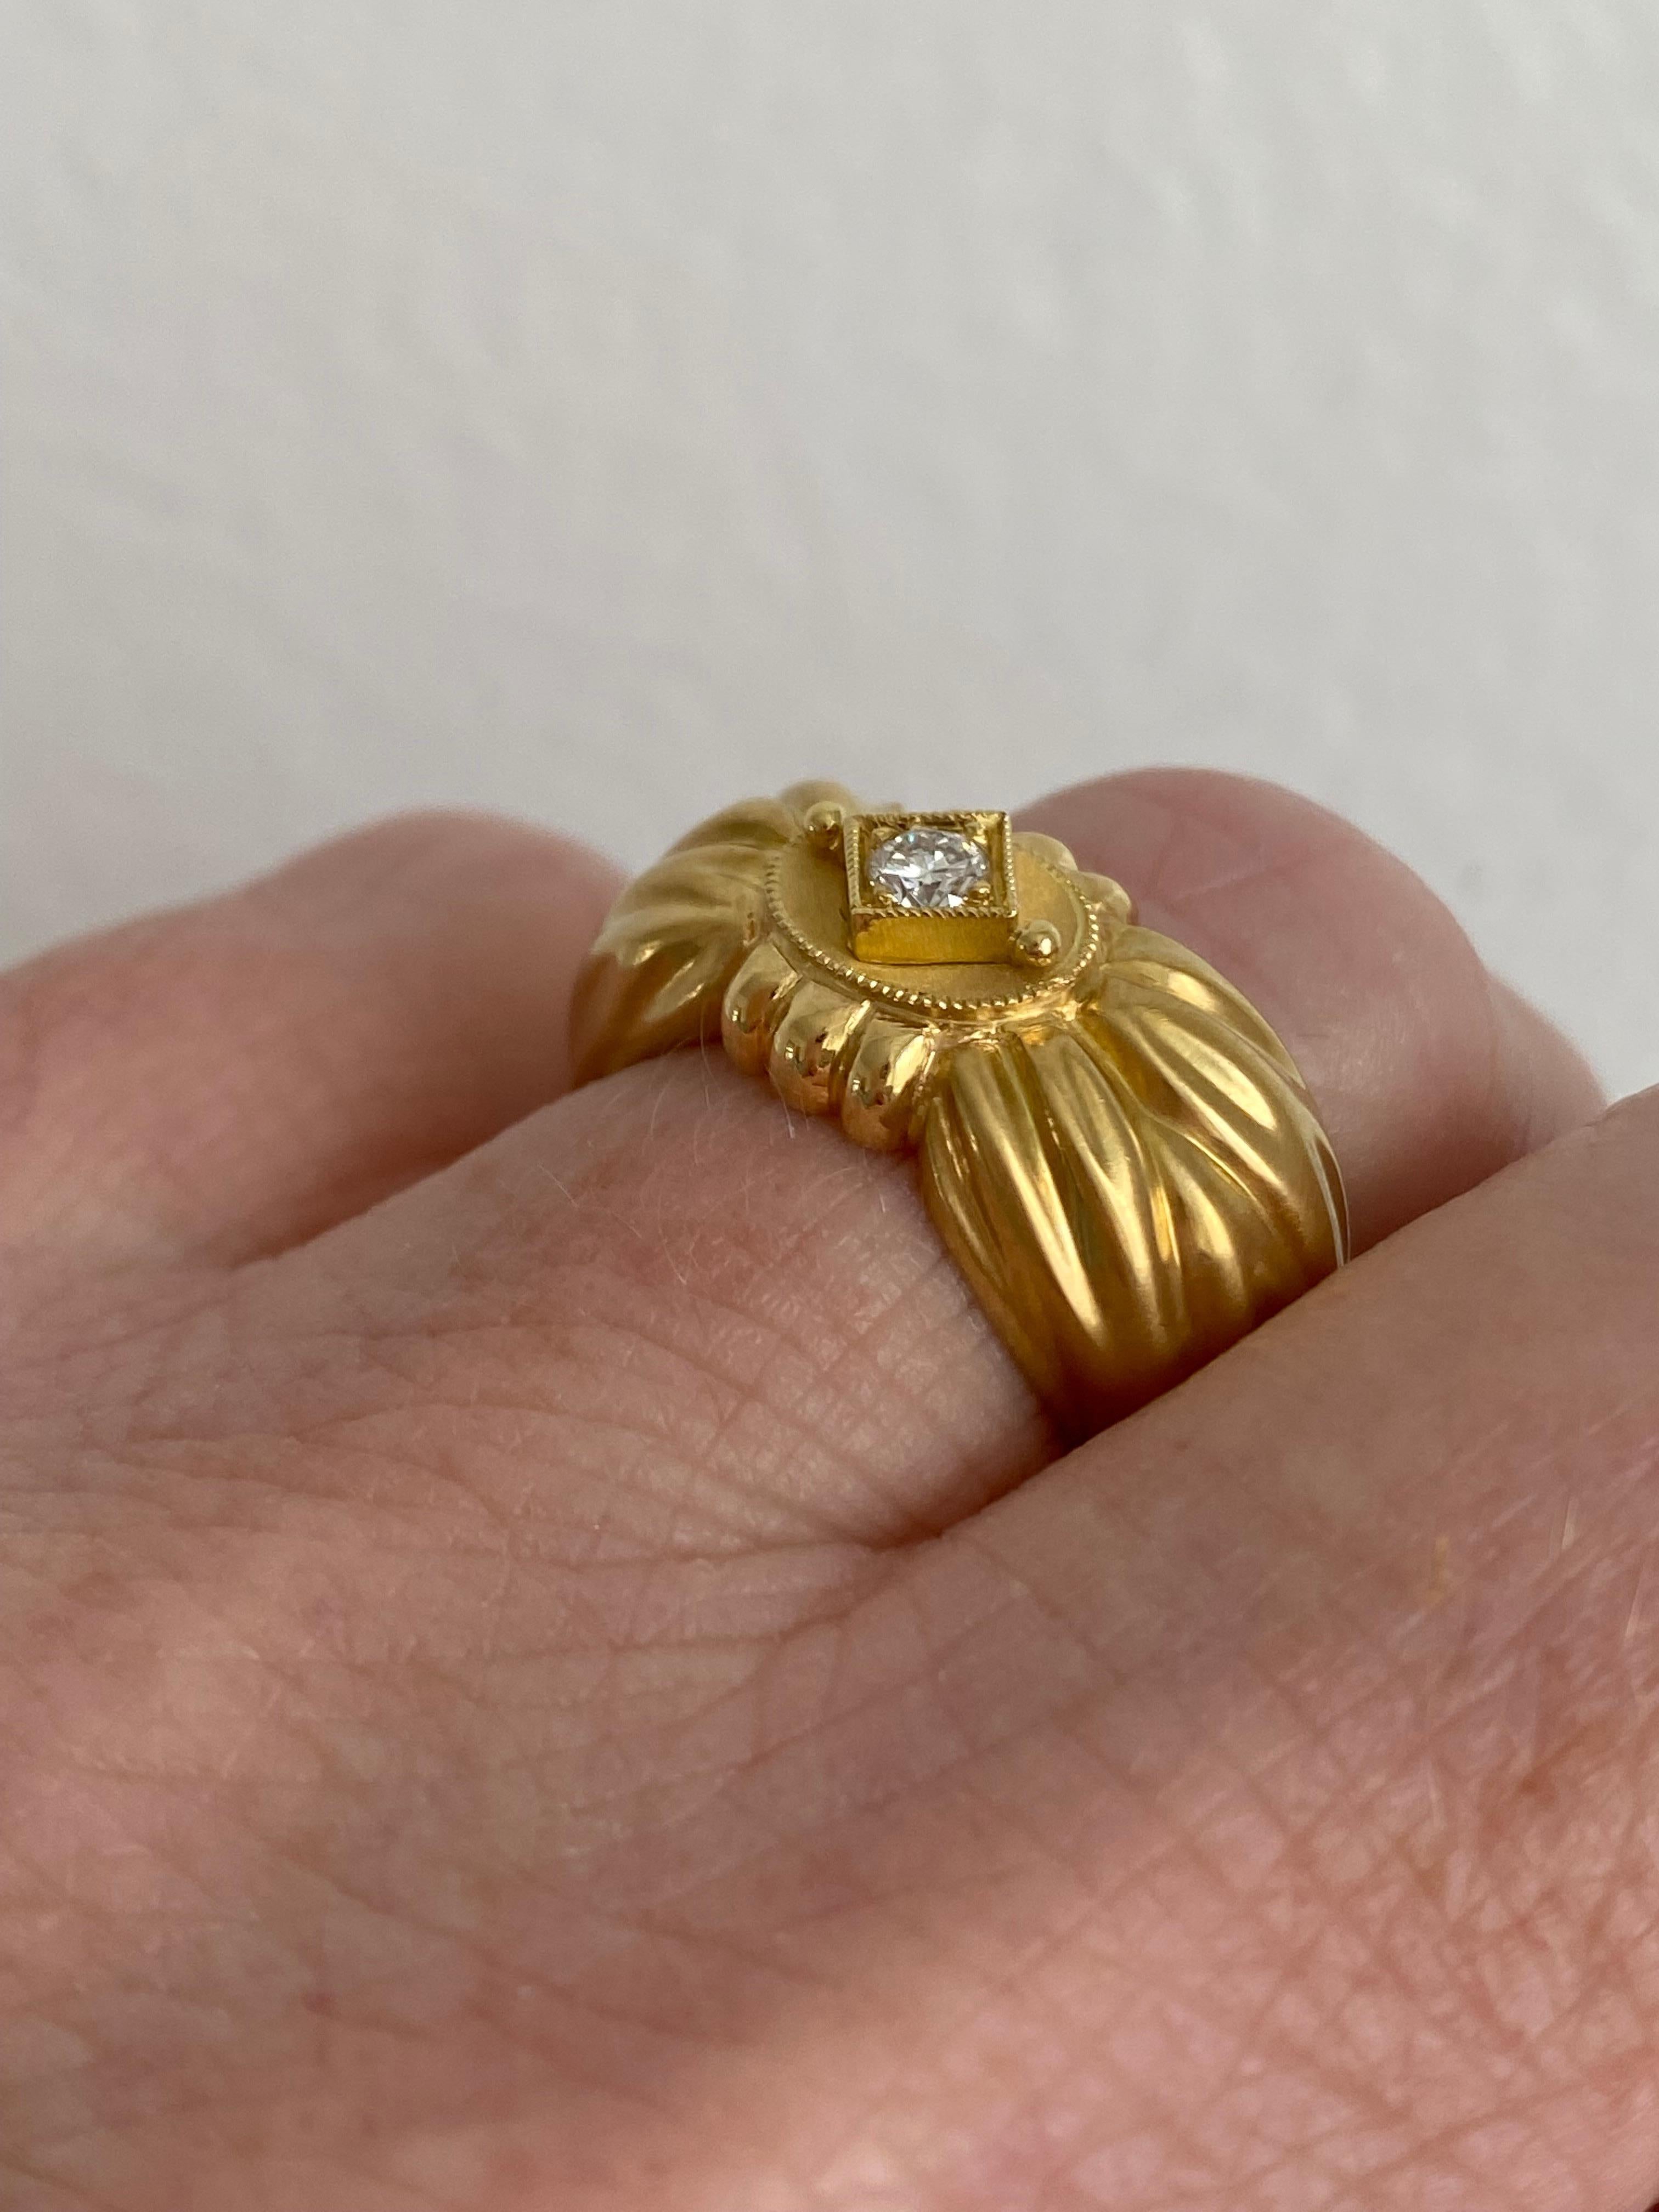 Retro Awesome Vintage 18K Yellow Gold Diamond 'Bow' Ring by SeidenGang 0.15ct For Sale